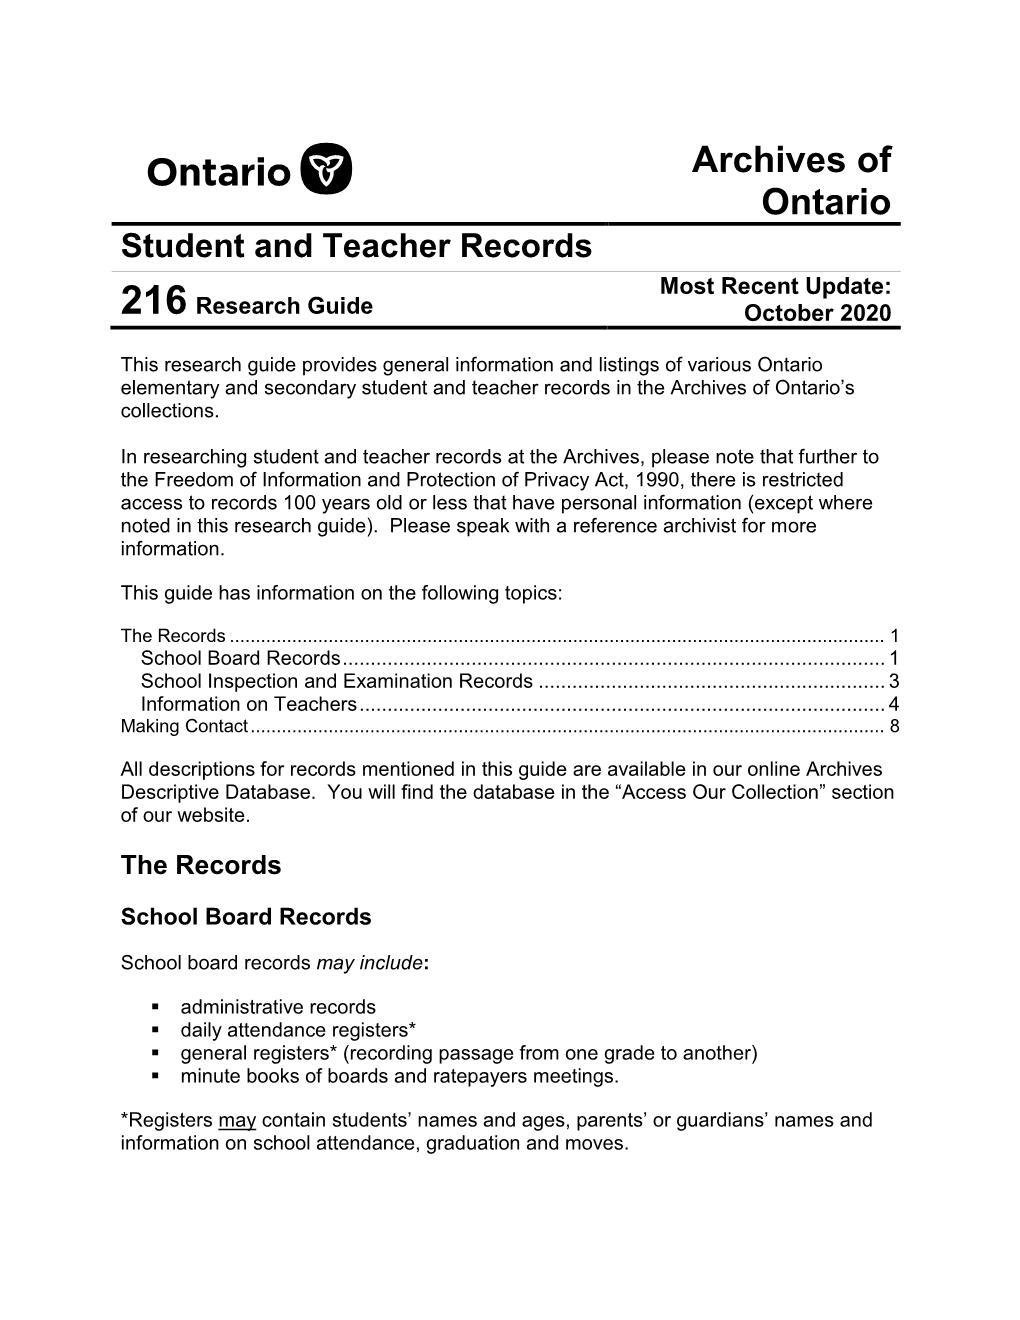 Archives of Ontario Student and Teacher Records Most Recent Update: 216 Research Guide October 2020